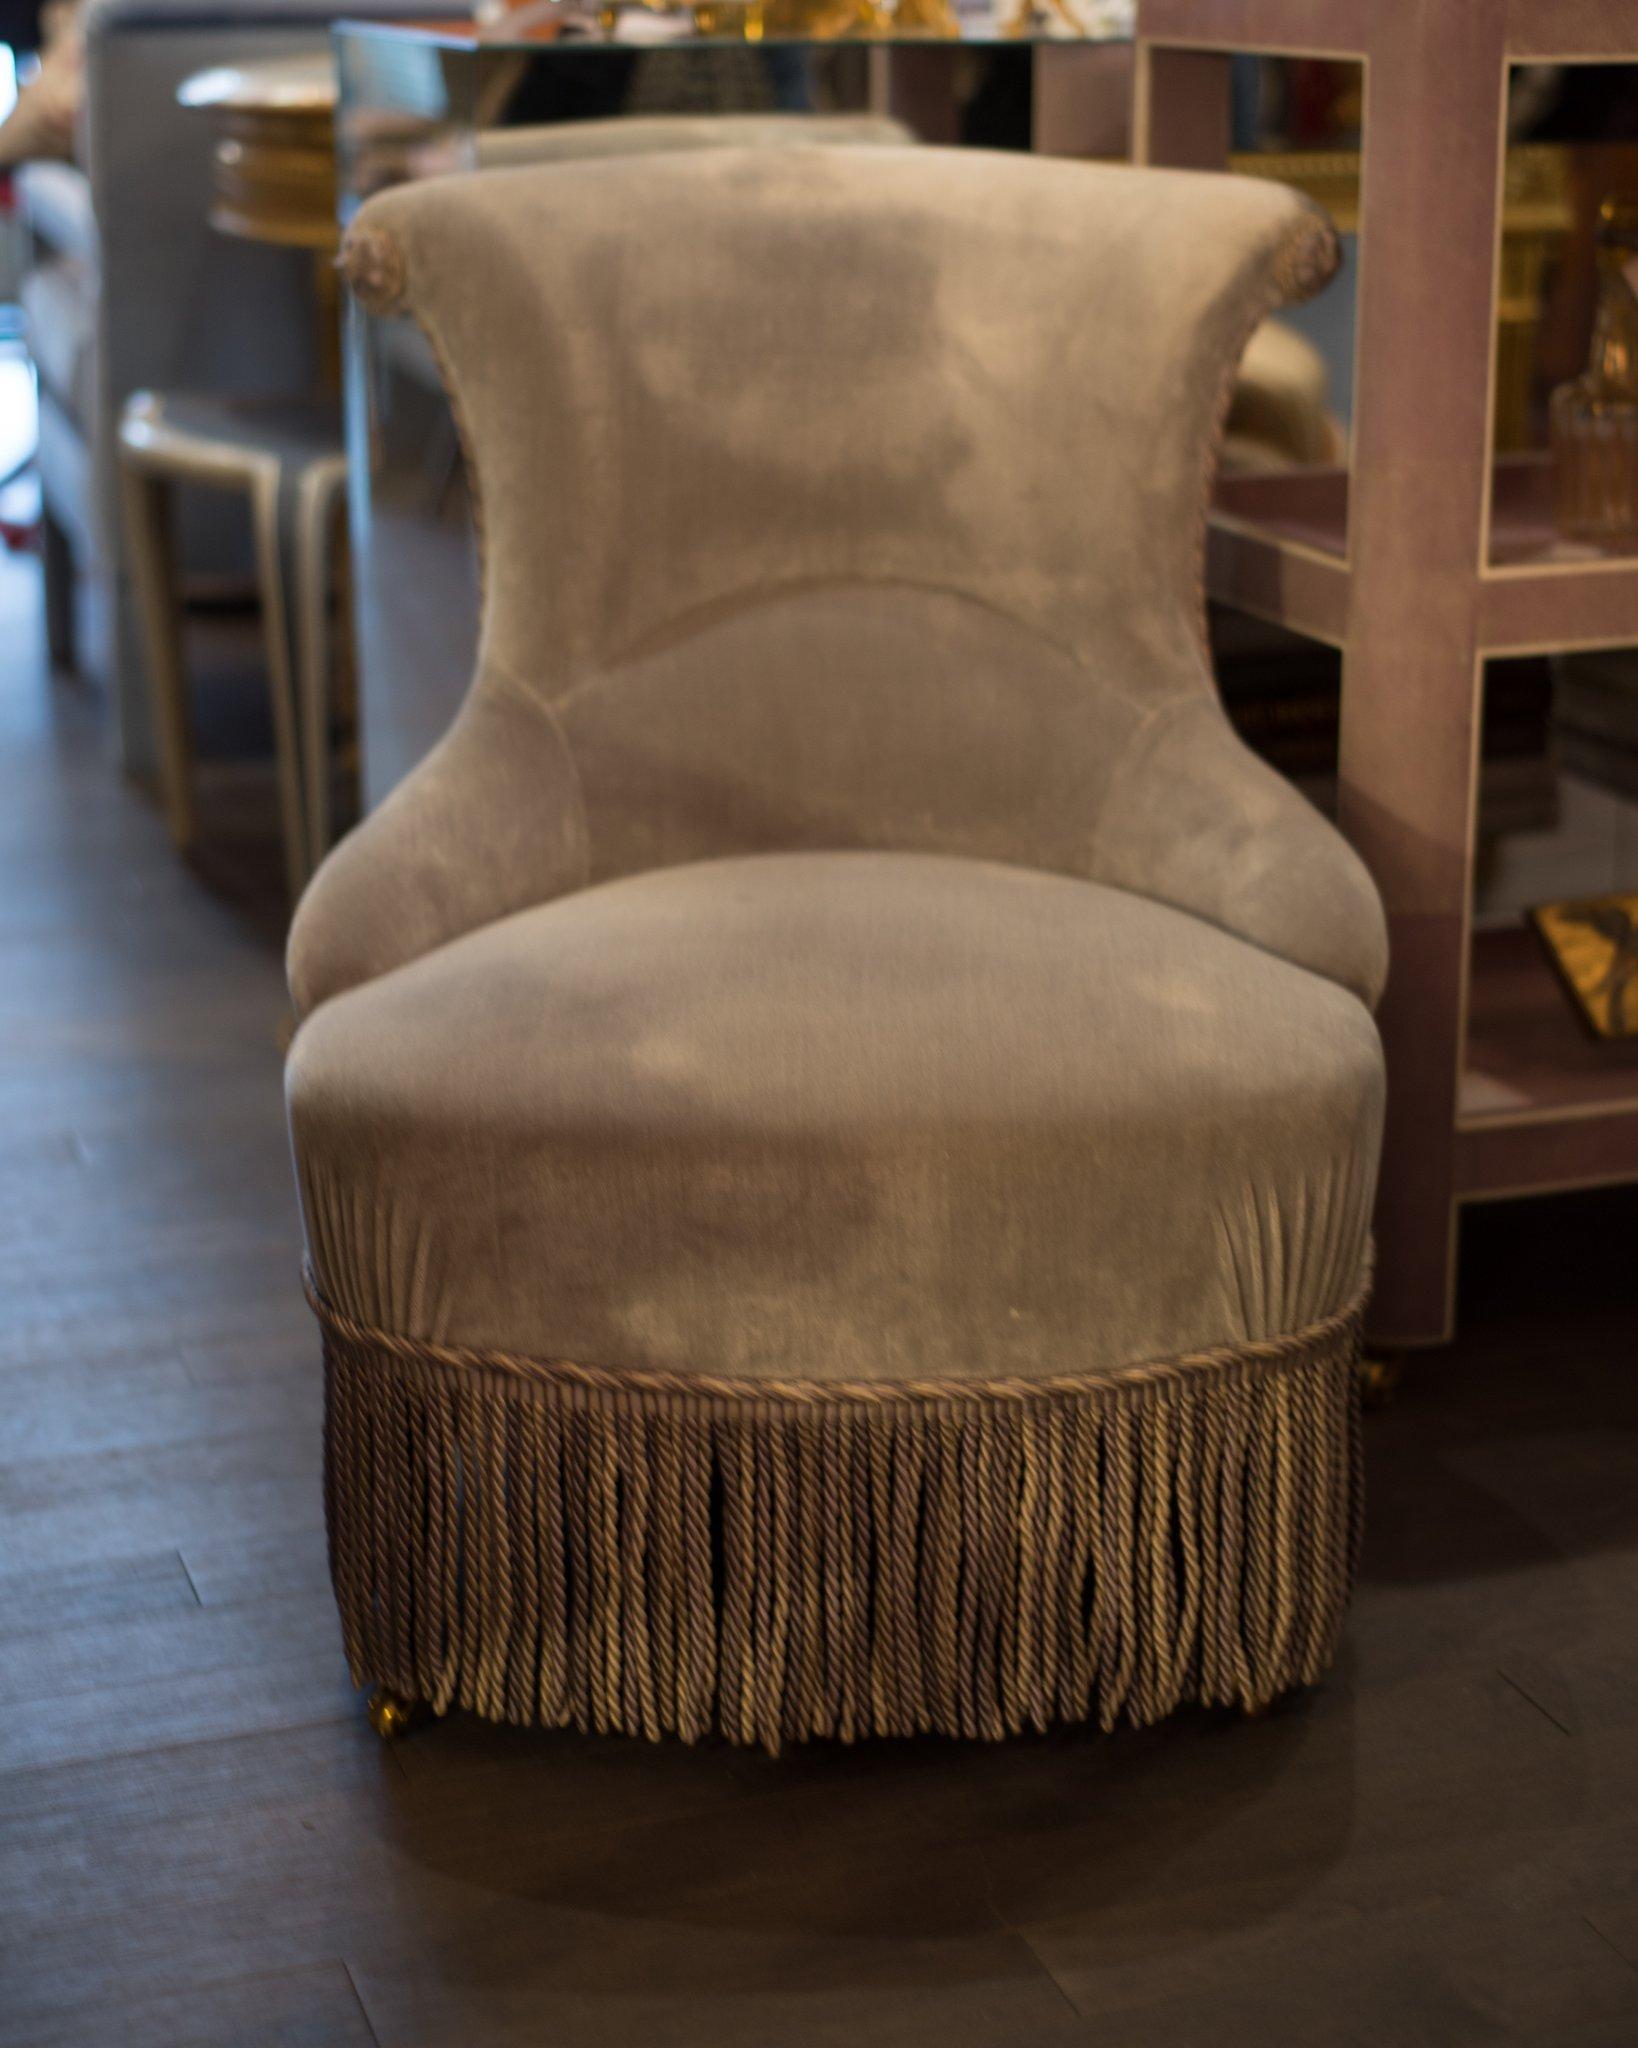 A pair of elegant 19th century antique French Napoleon III slipper chairs adorned with rich bullion fringe, rope and rosettes from Samuel & Sons. Beautifully restored and upholstered by a master upholsterer, who has been diligent to maintain the